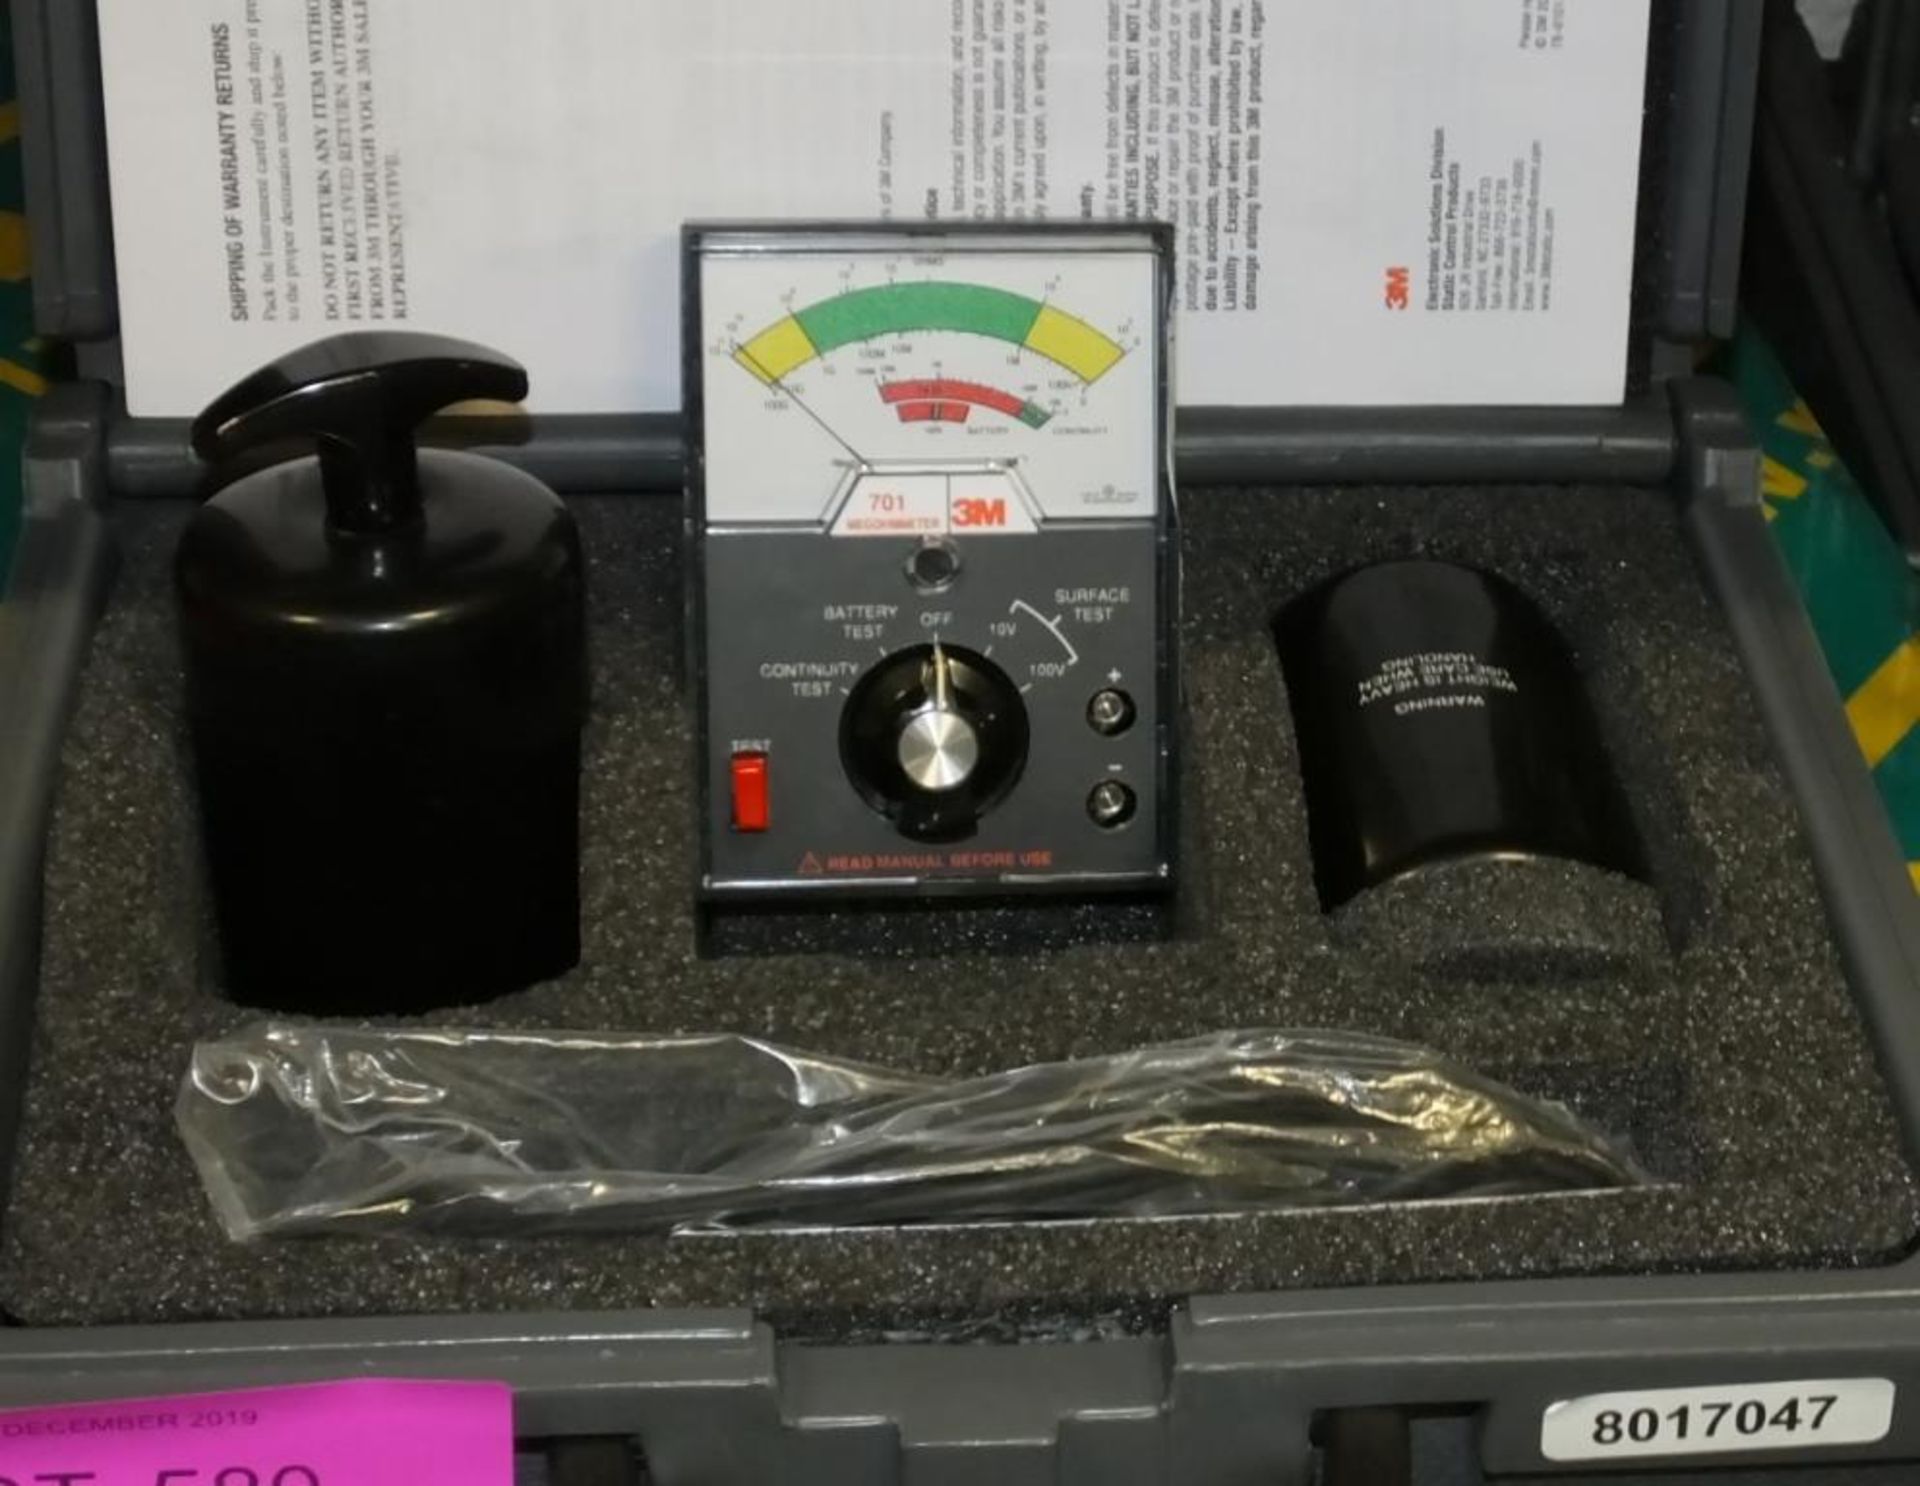 3M 701 Test Kit for Static Control Surfaces